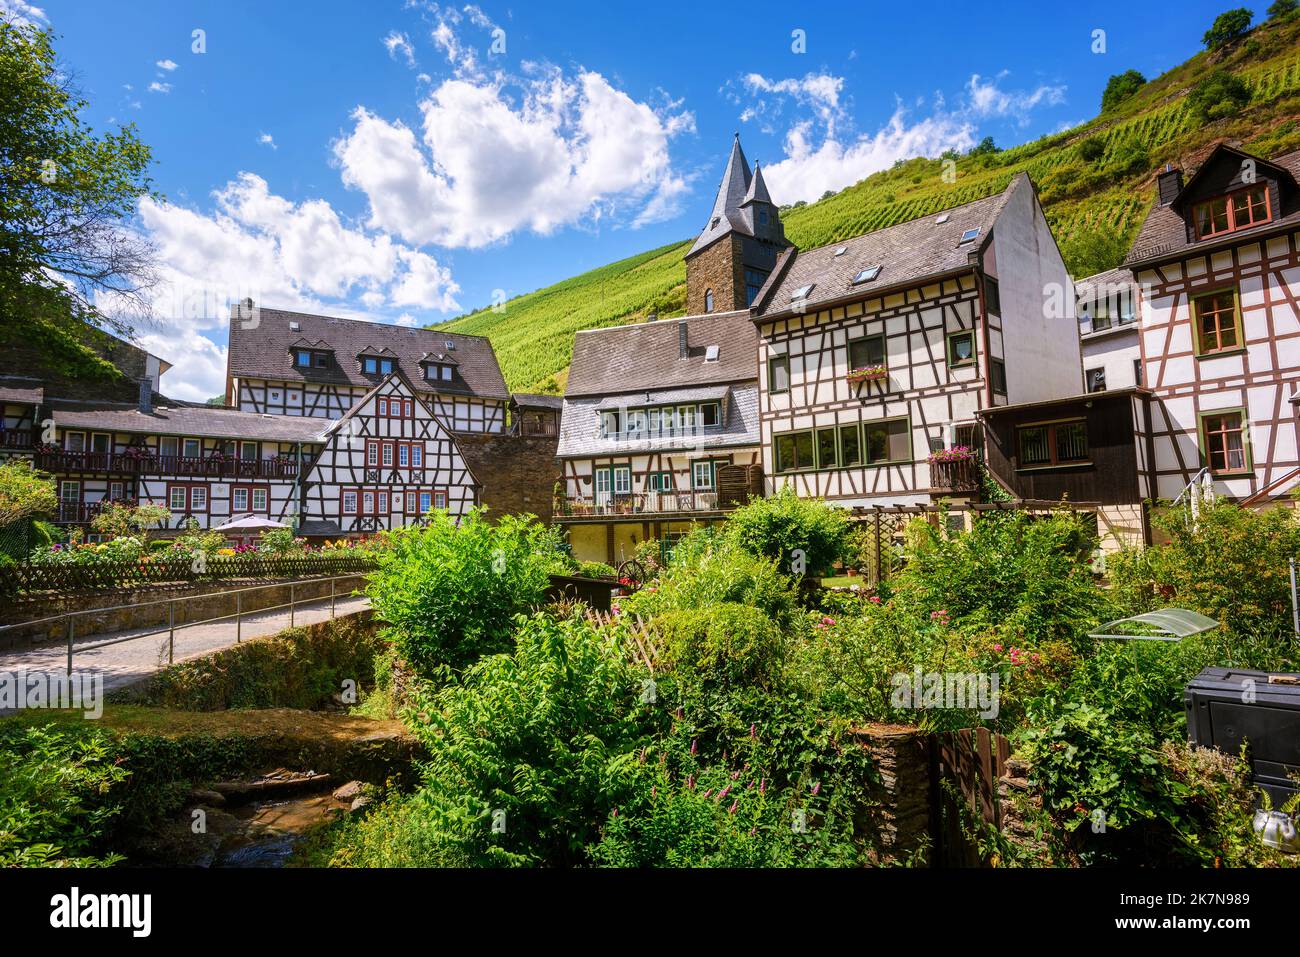 White half-timbered houses amid the vineyard hills in historical Bacharach town, Germany, a romantic small town in Rhine river valley Stock Photo